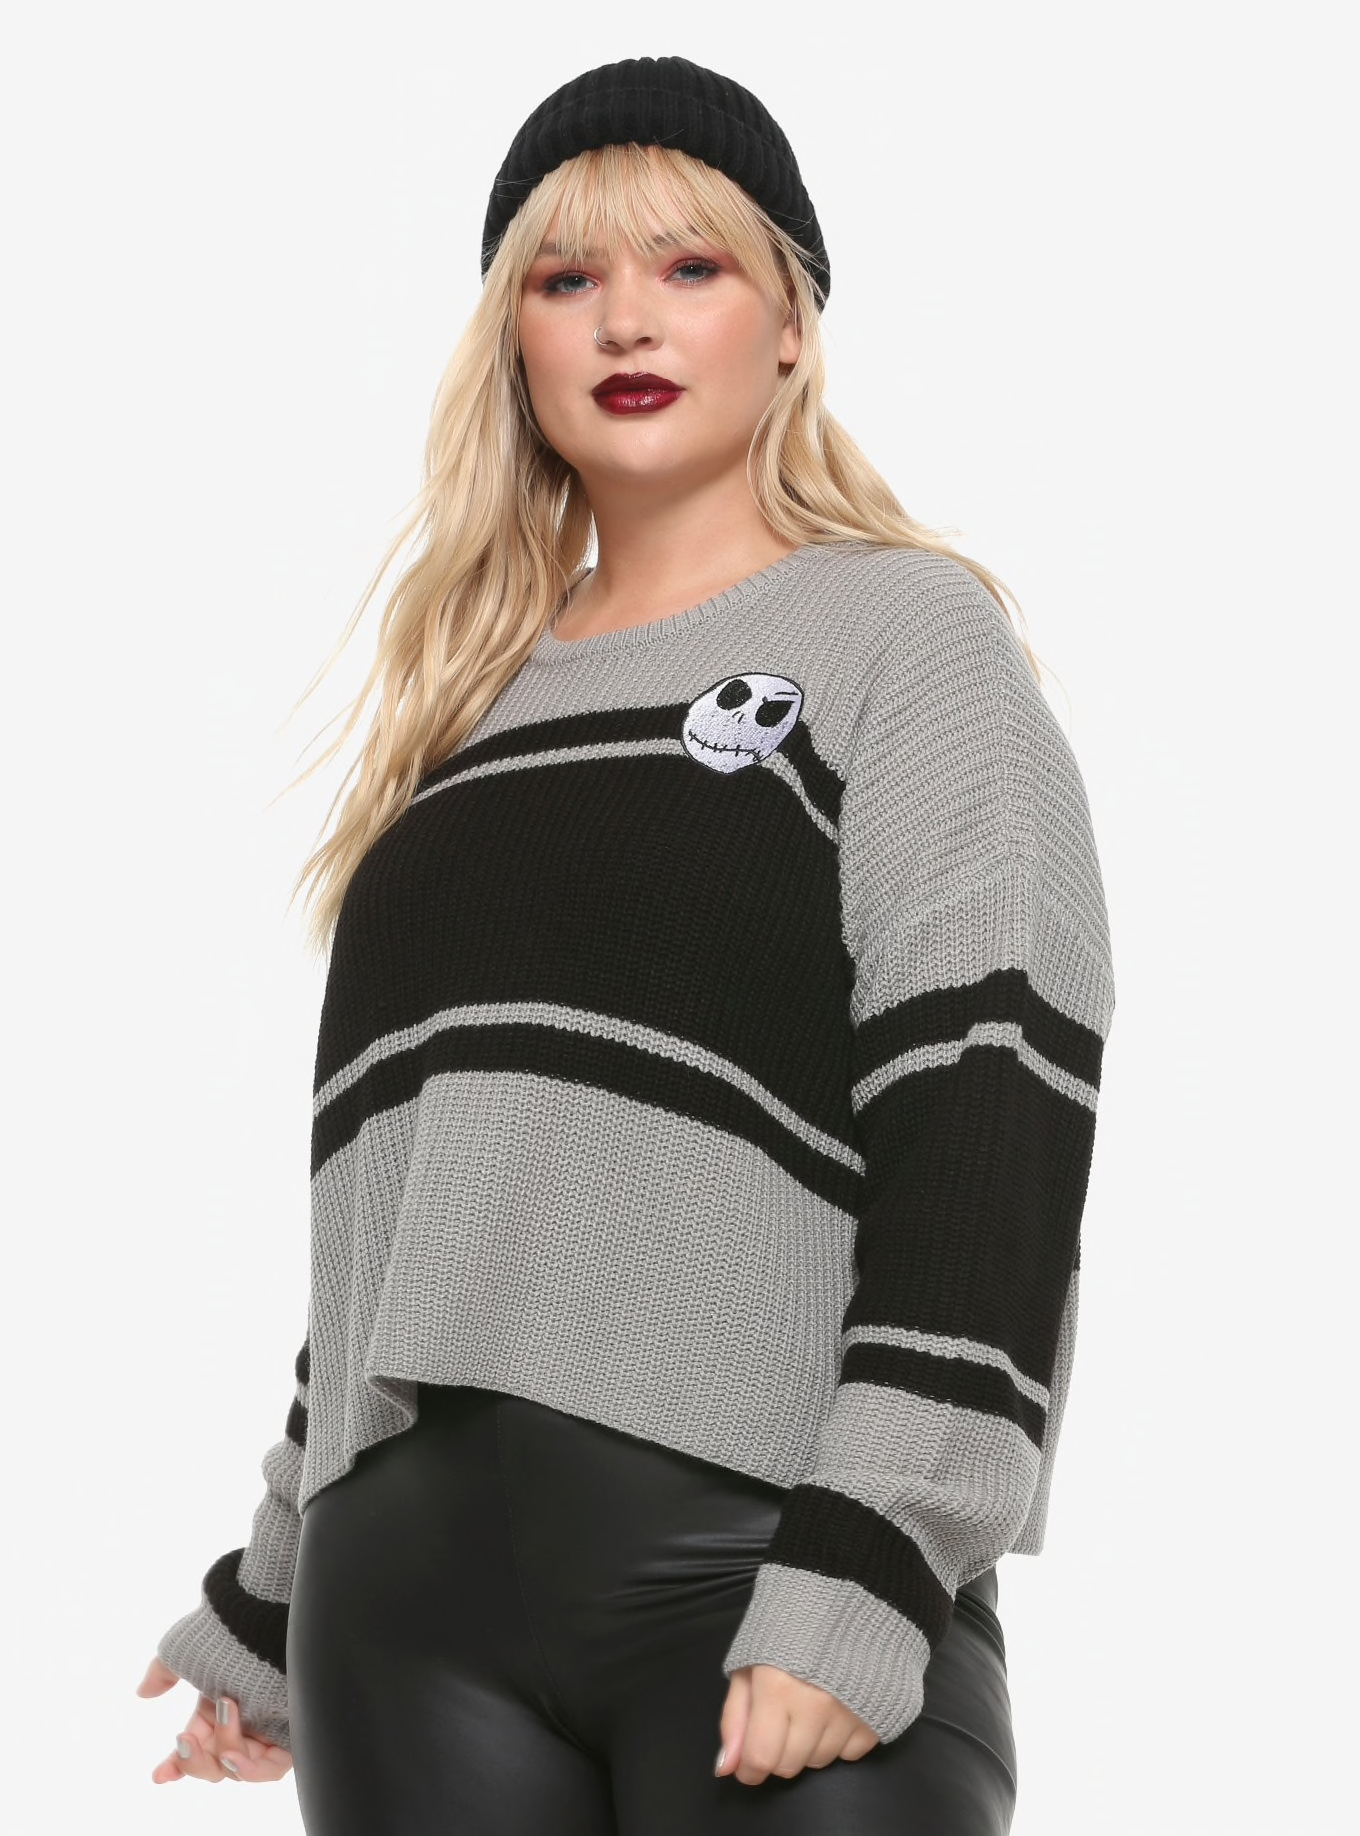 THE NIGHTMARE BEFORE CHRISTMAS JACK STRIPED CROP SWEATER PLUS SIZE